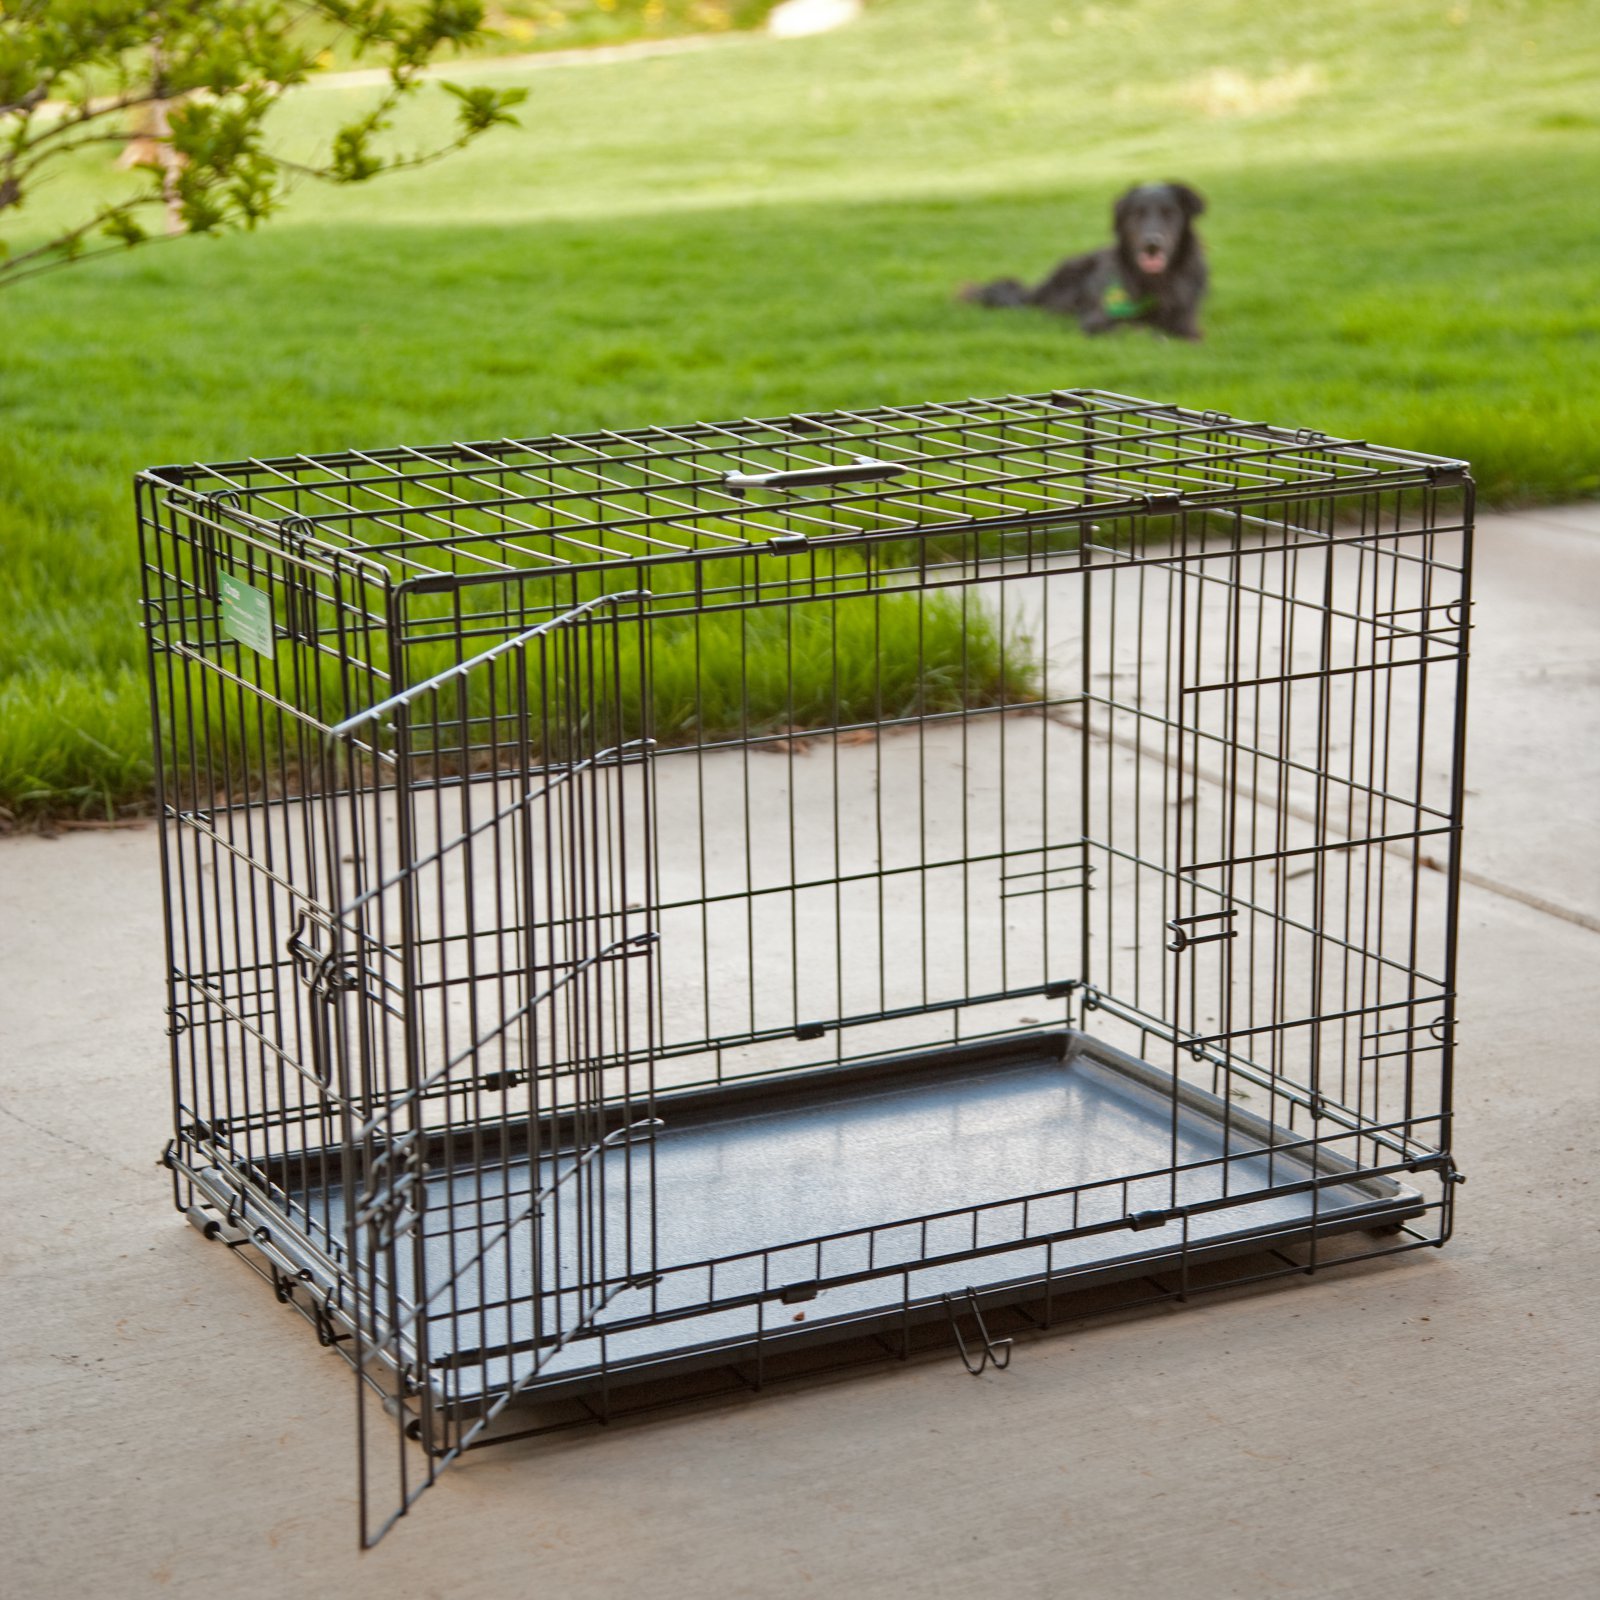 MidWest Homes For Pets Double Door iCrate Metal Dog Crate, 36" - image 1 of 10